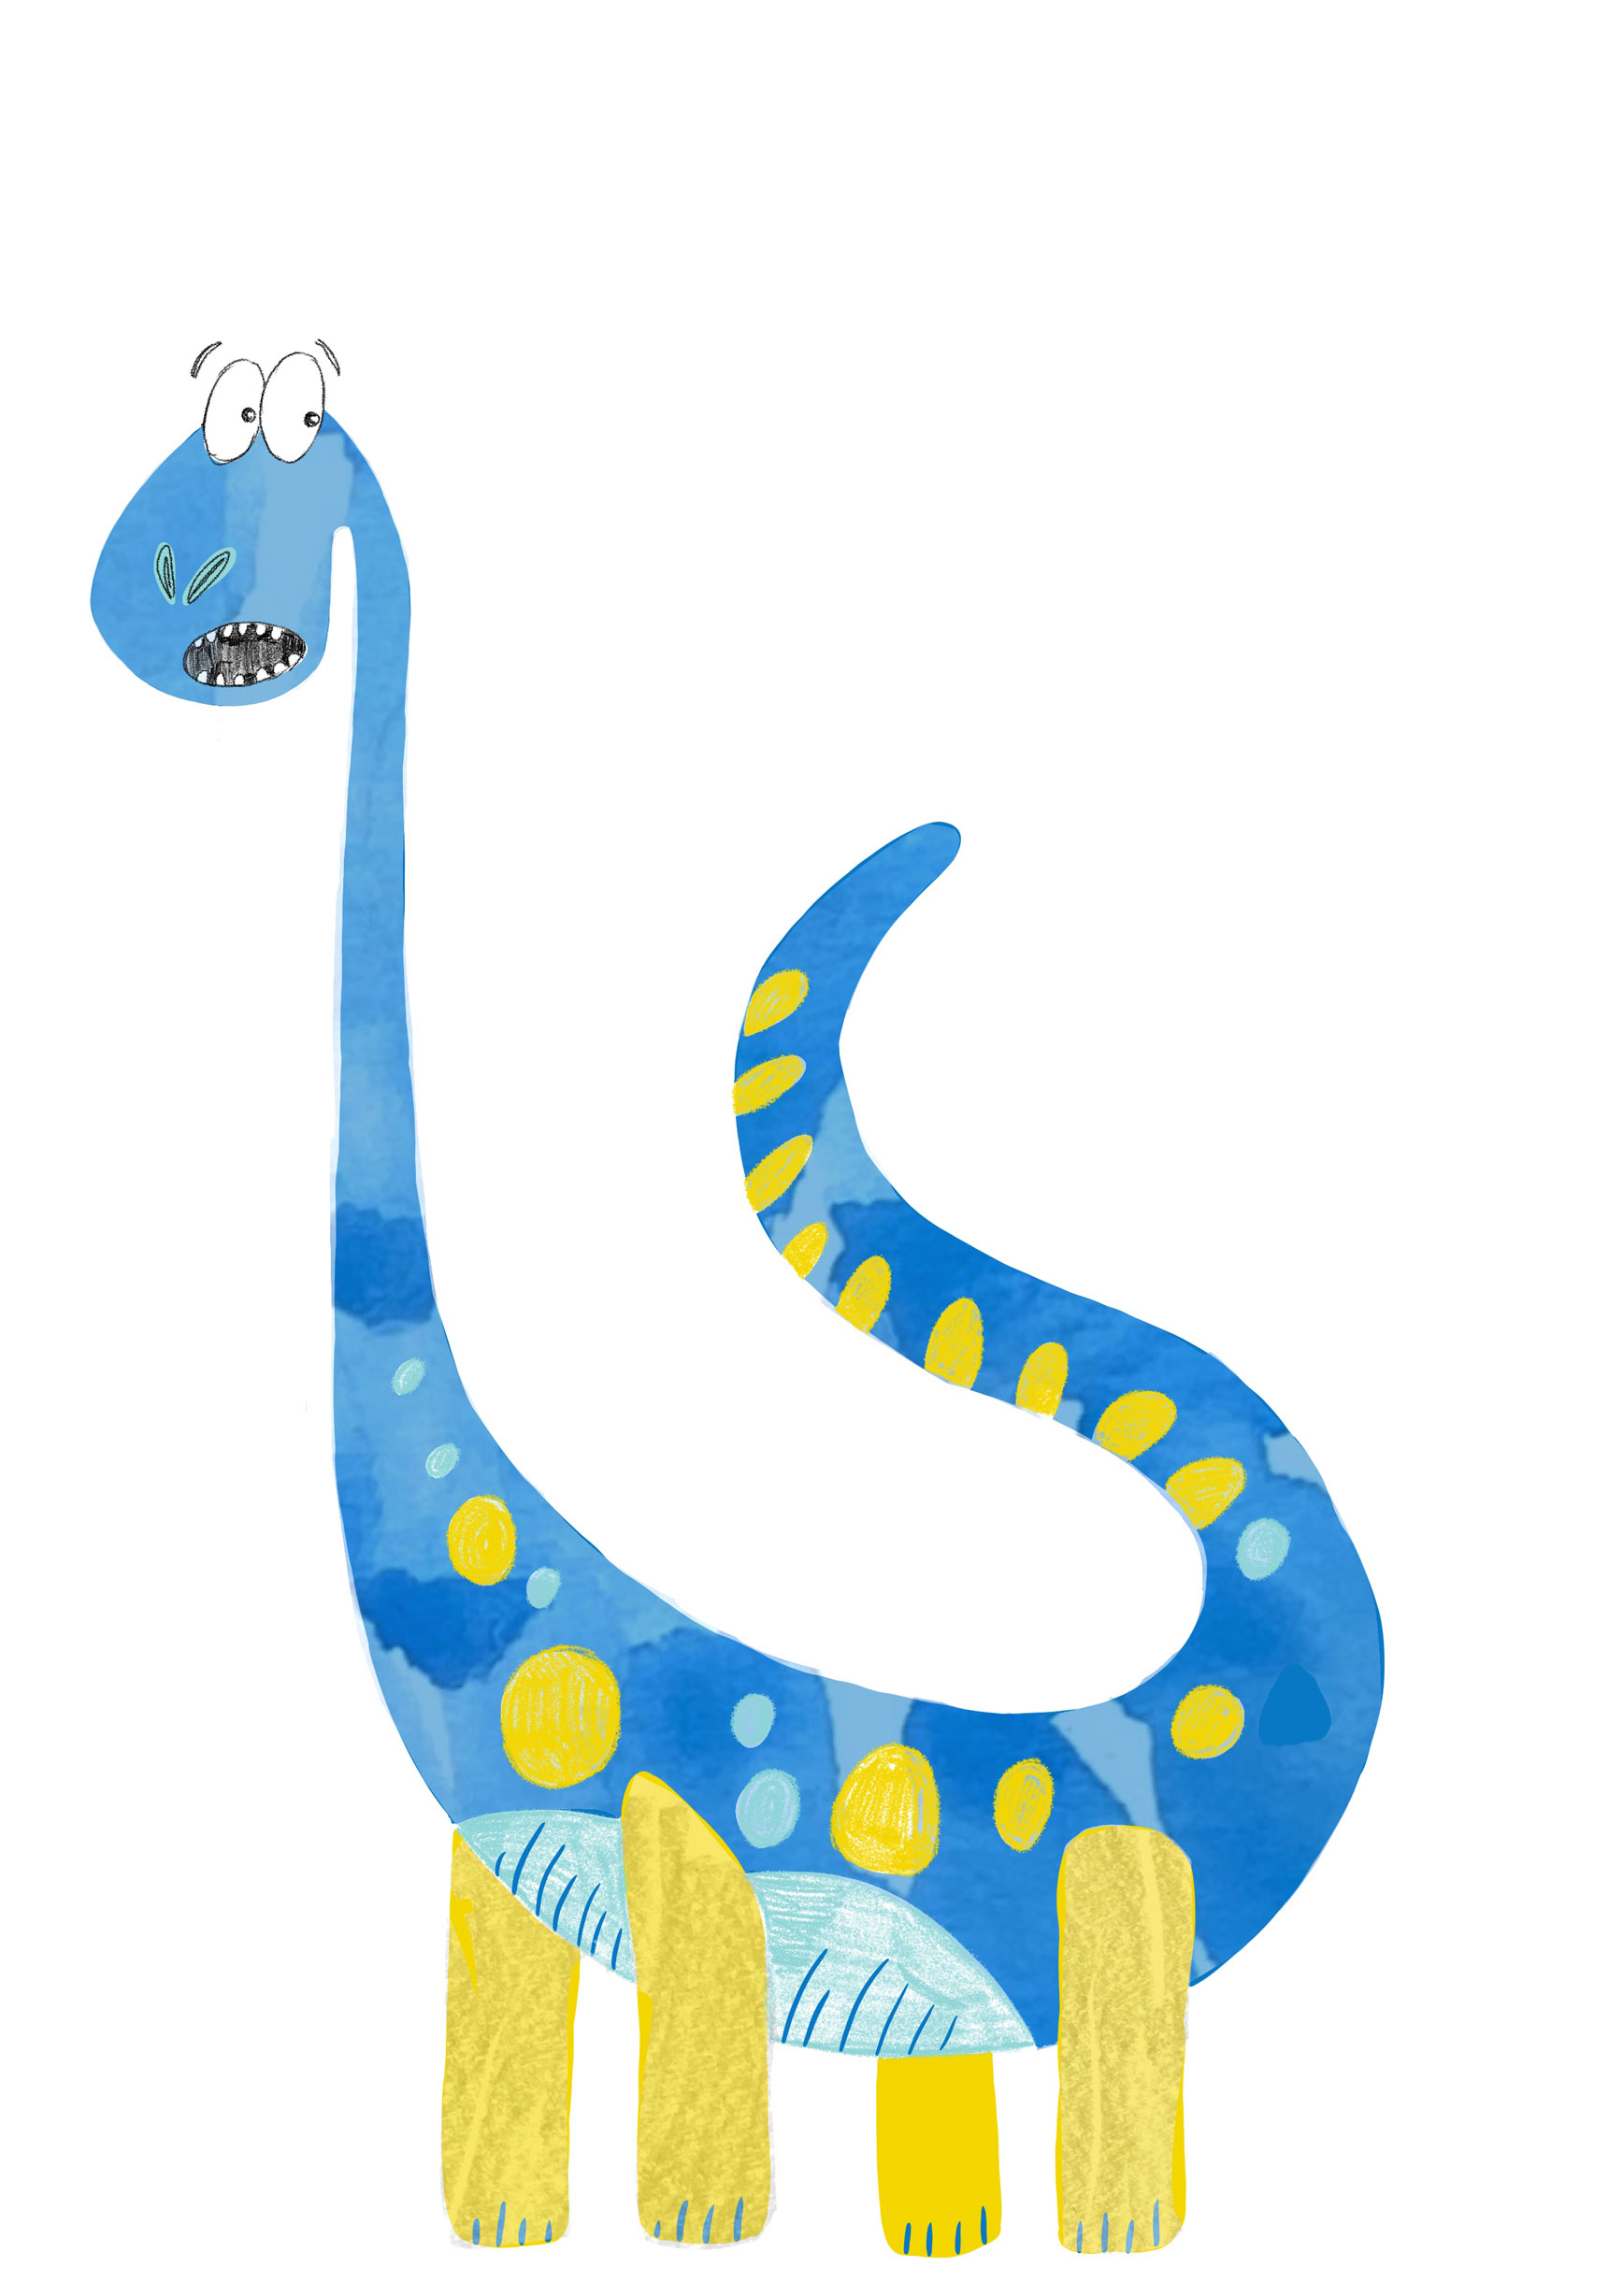 Illustrated diplodocus by Catie McFarland showing a blue and yellow diplodocus.